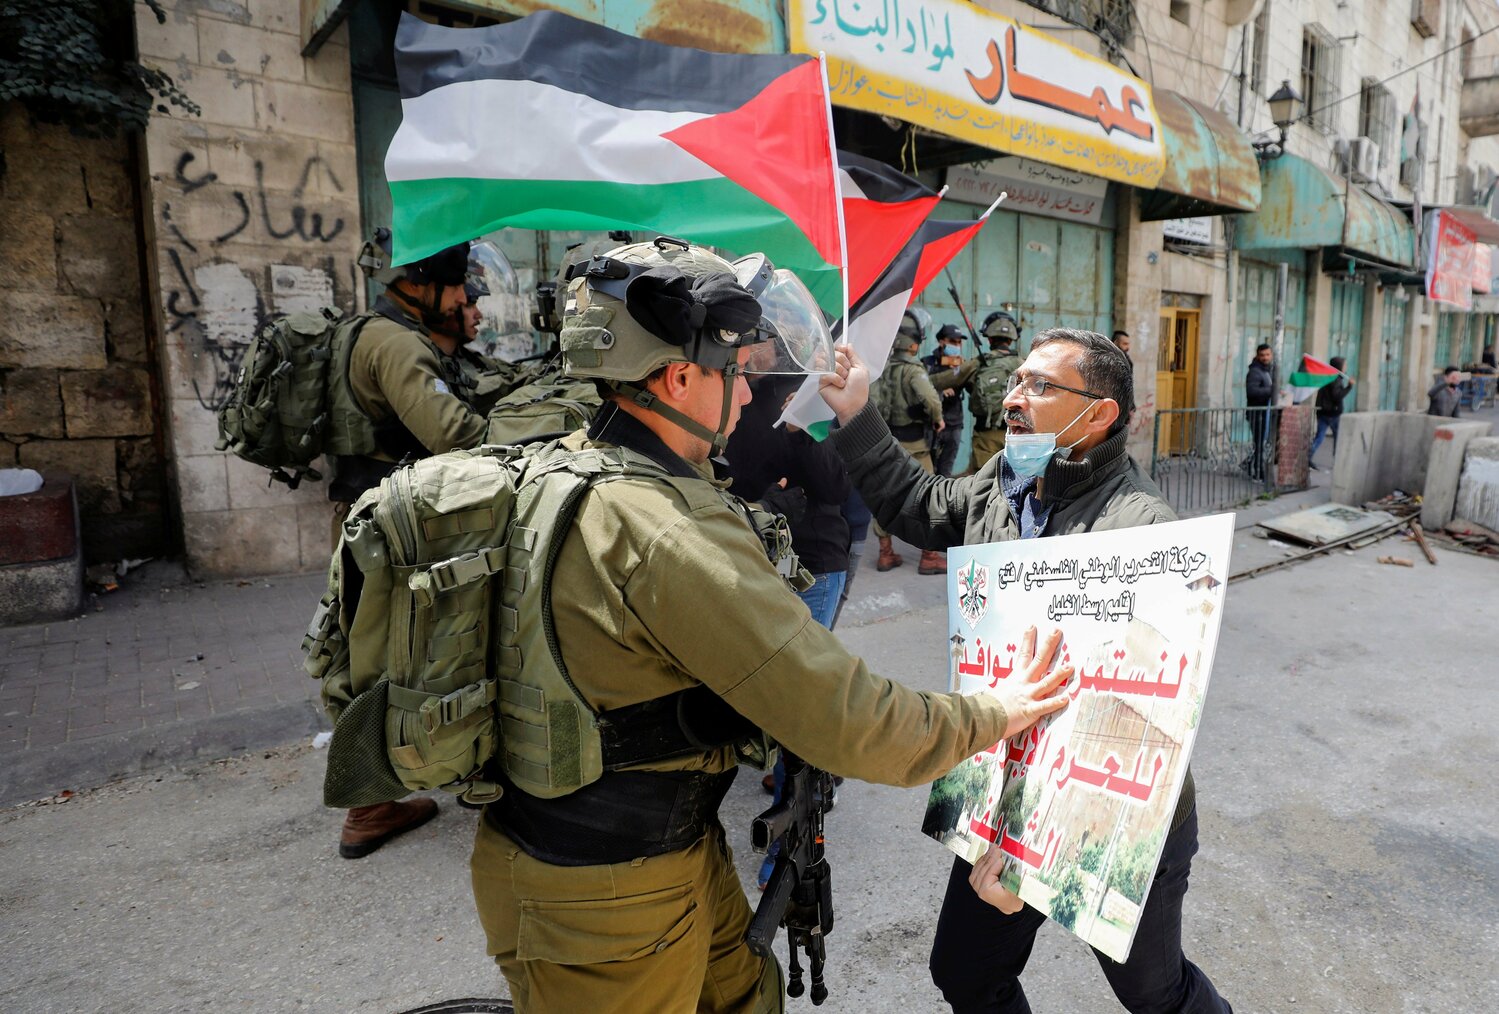 A Palestinian demonstrator argues with an Israeli soldier during a protest in this file photo from March 31, 2021.